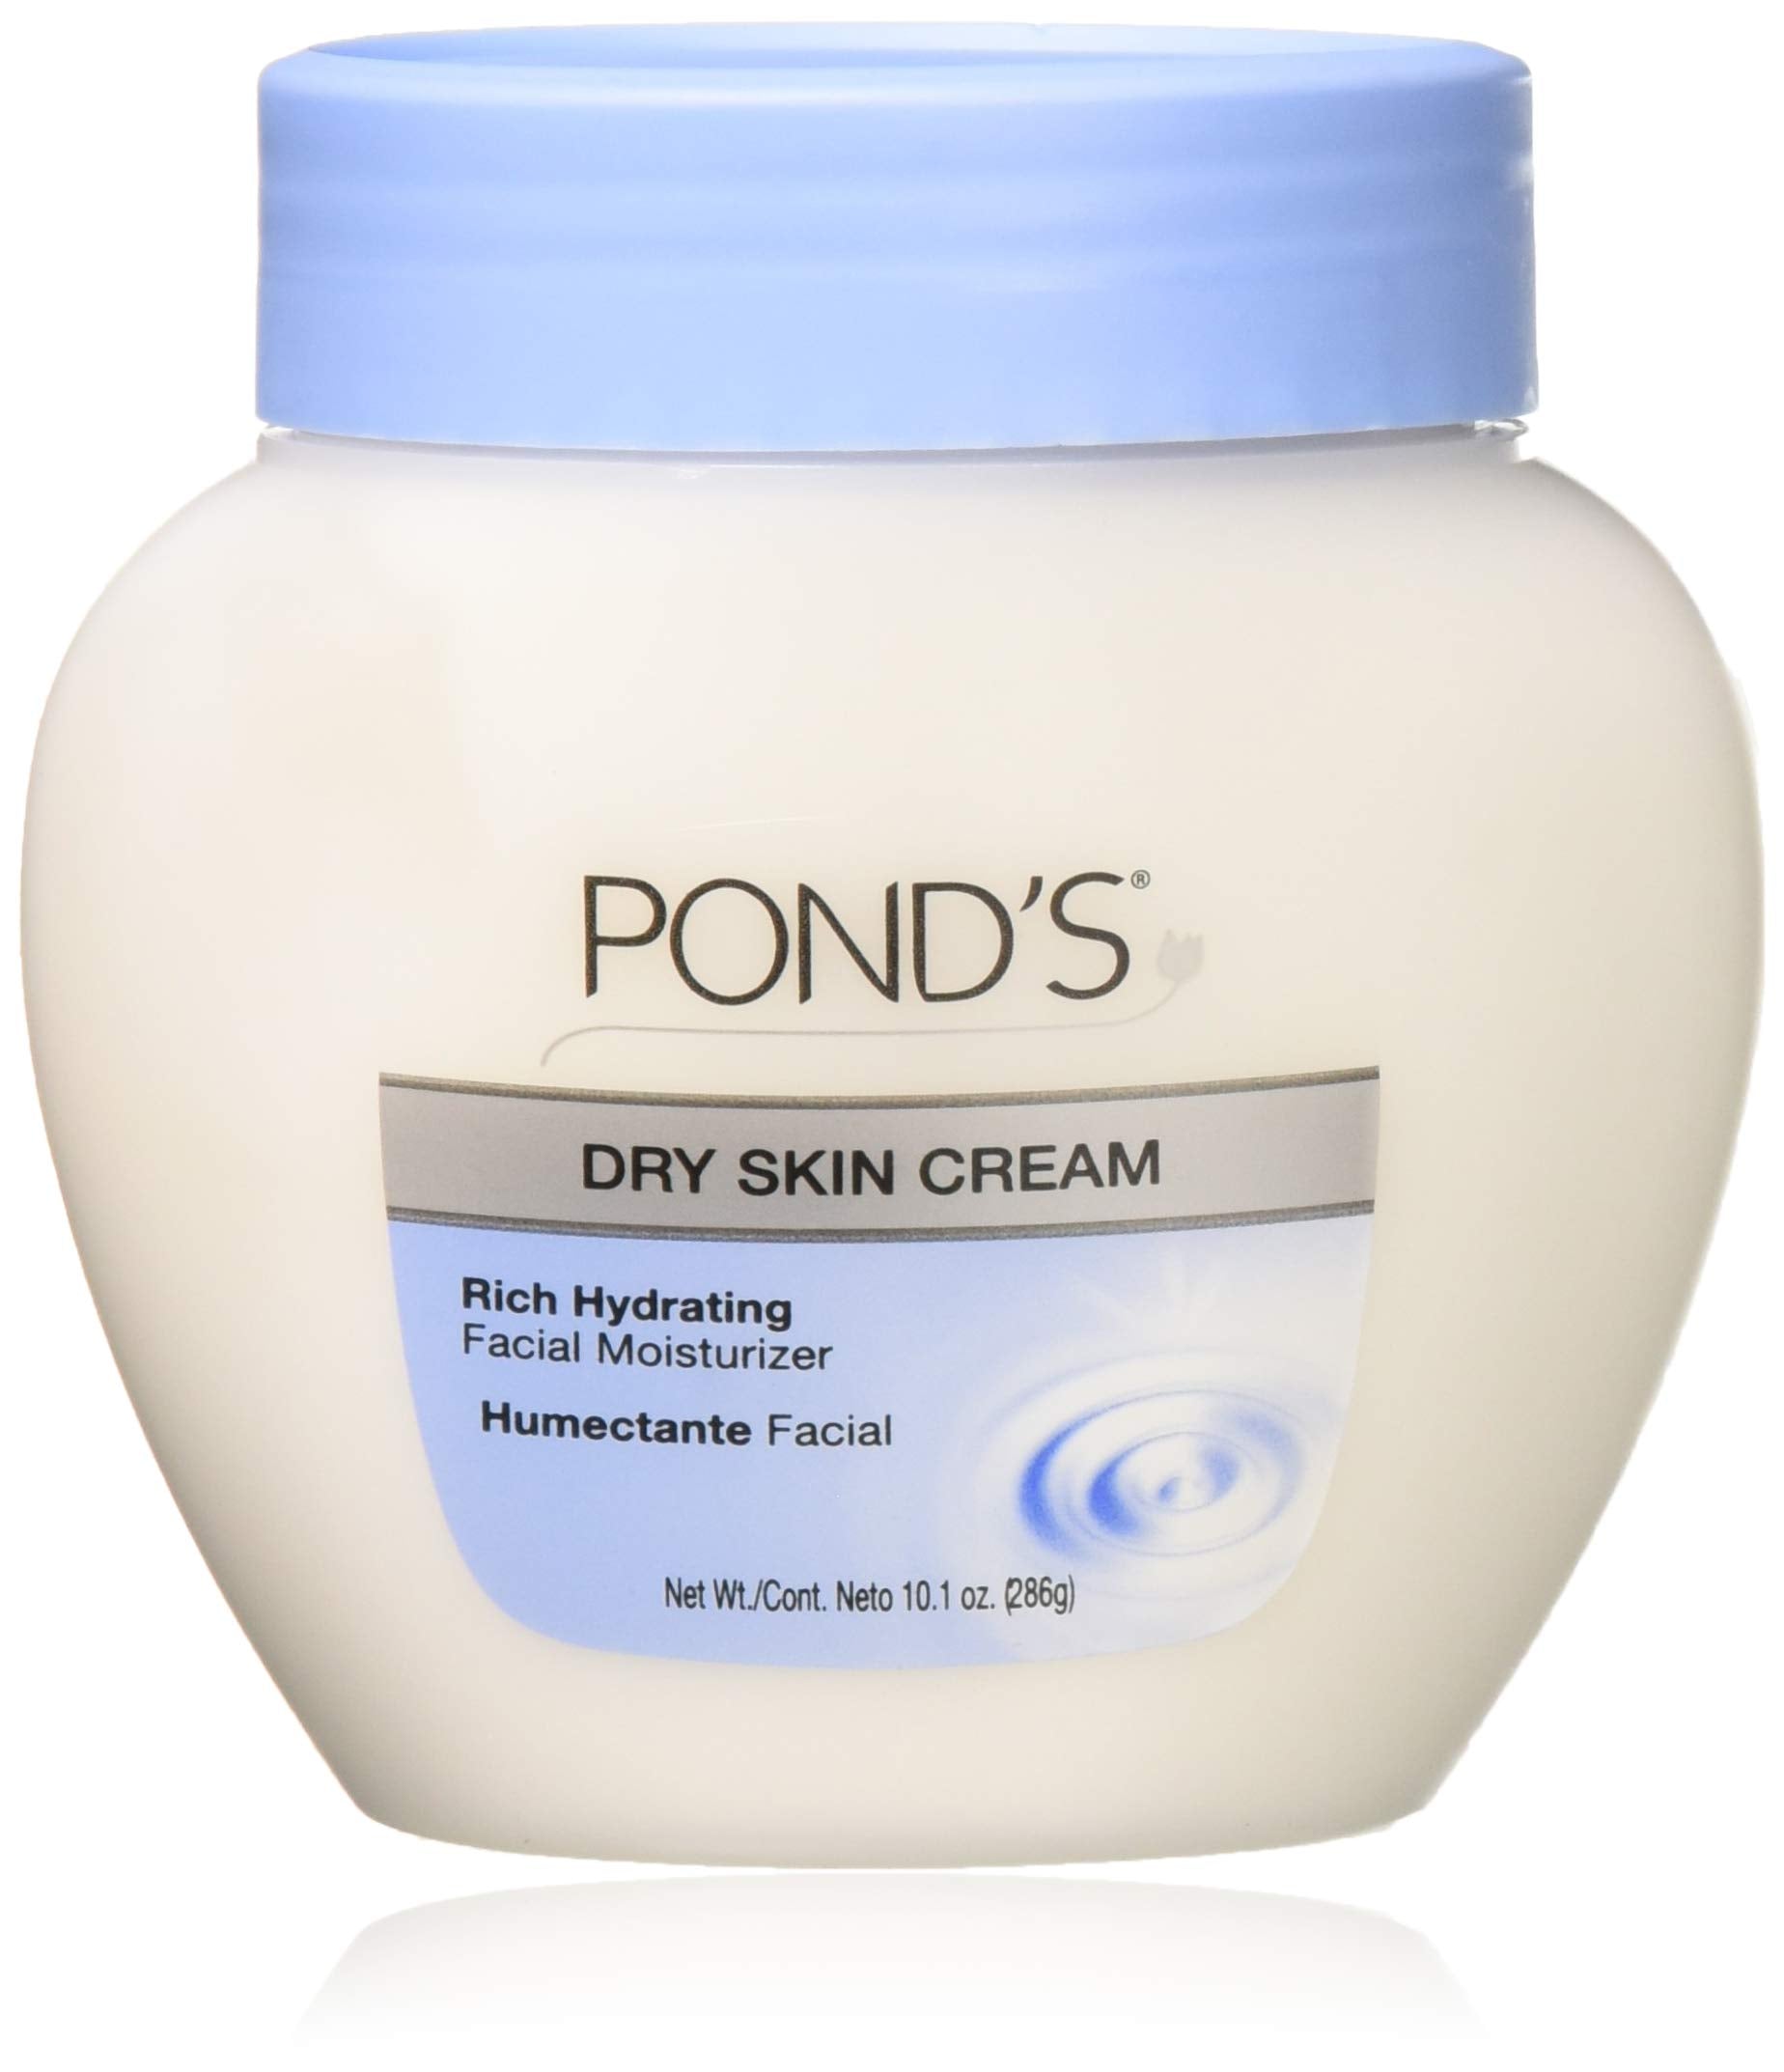 Pond's Dry Skin Cream The Caring Classic 10.1 oz Pack of